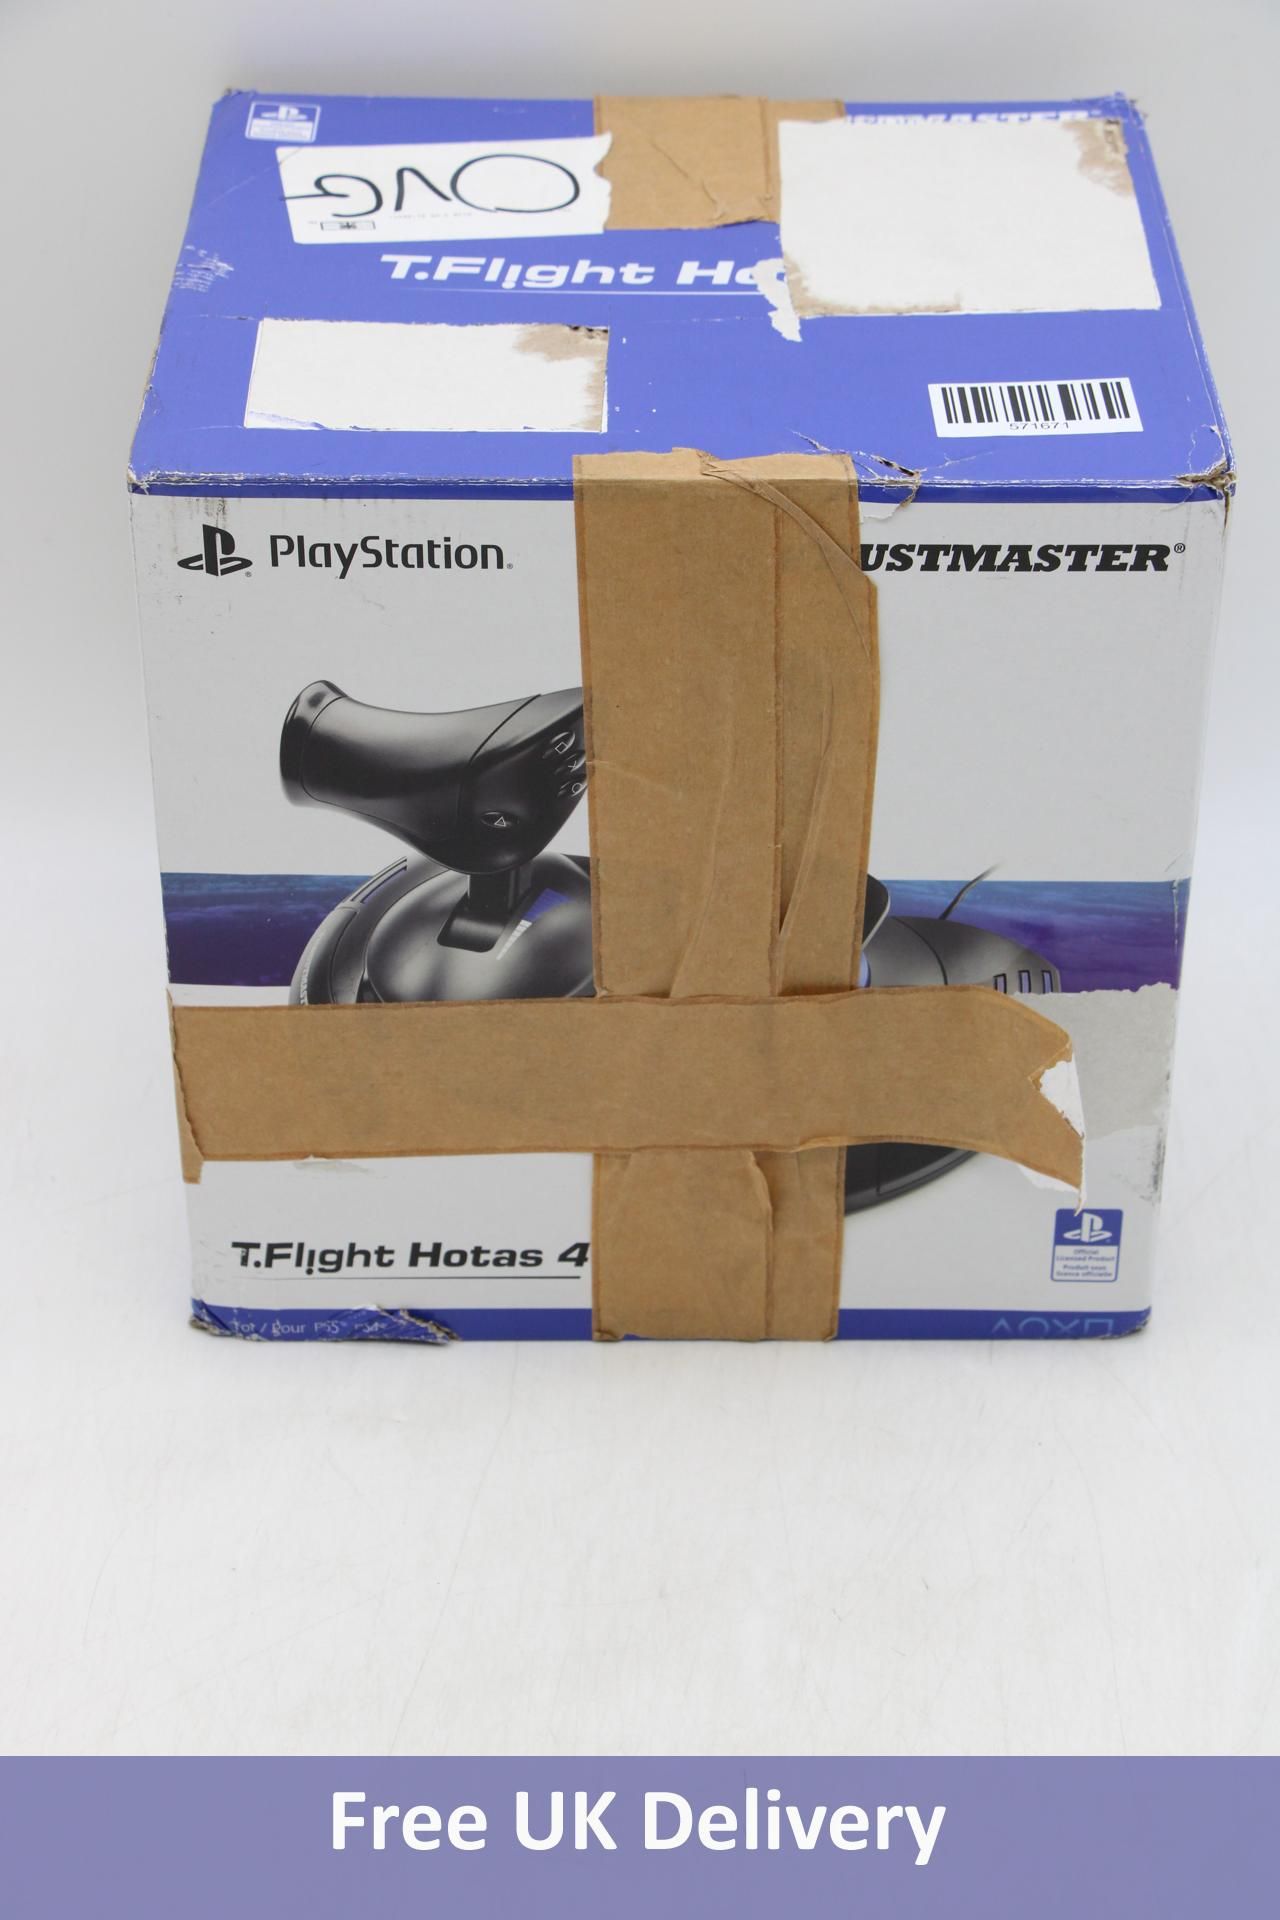 Thrustmaster T.Flight Hotas 4 Joystick, and Throttle for PS5 / PS4 / Windows. Box damaged, not check